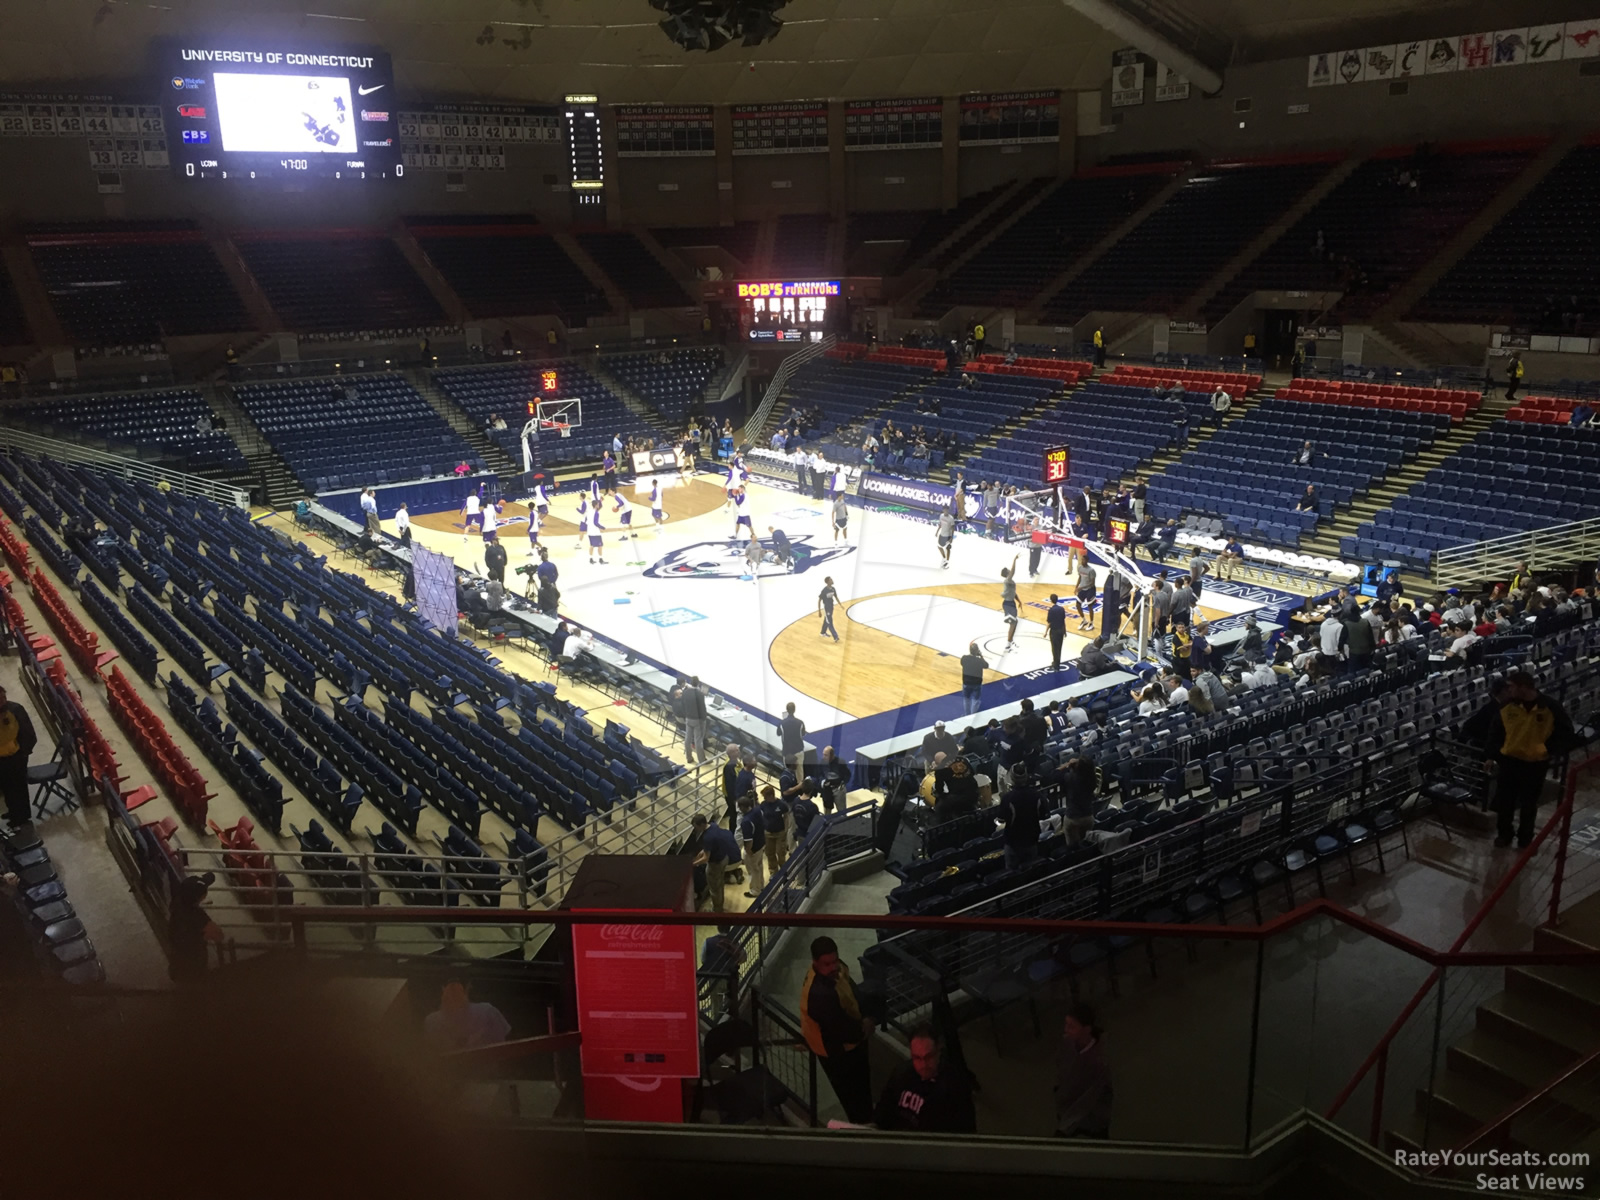 section 1, row 9 seat view  - gampel pavilion